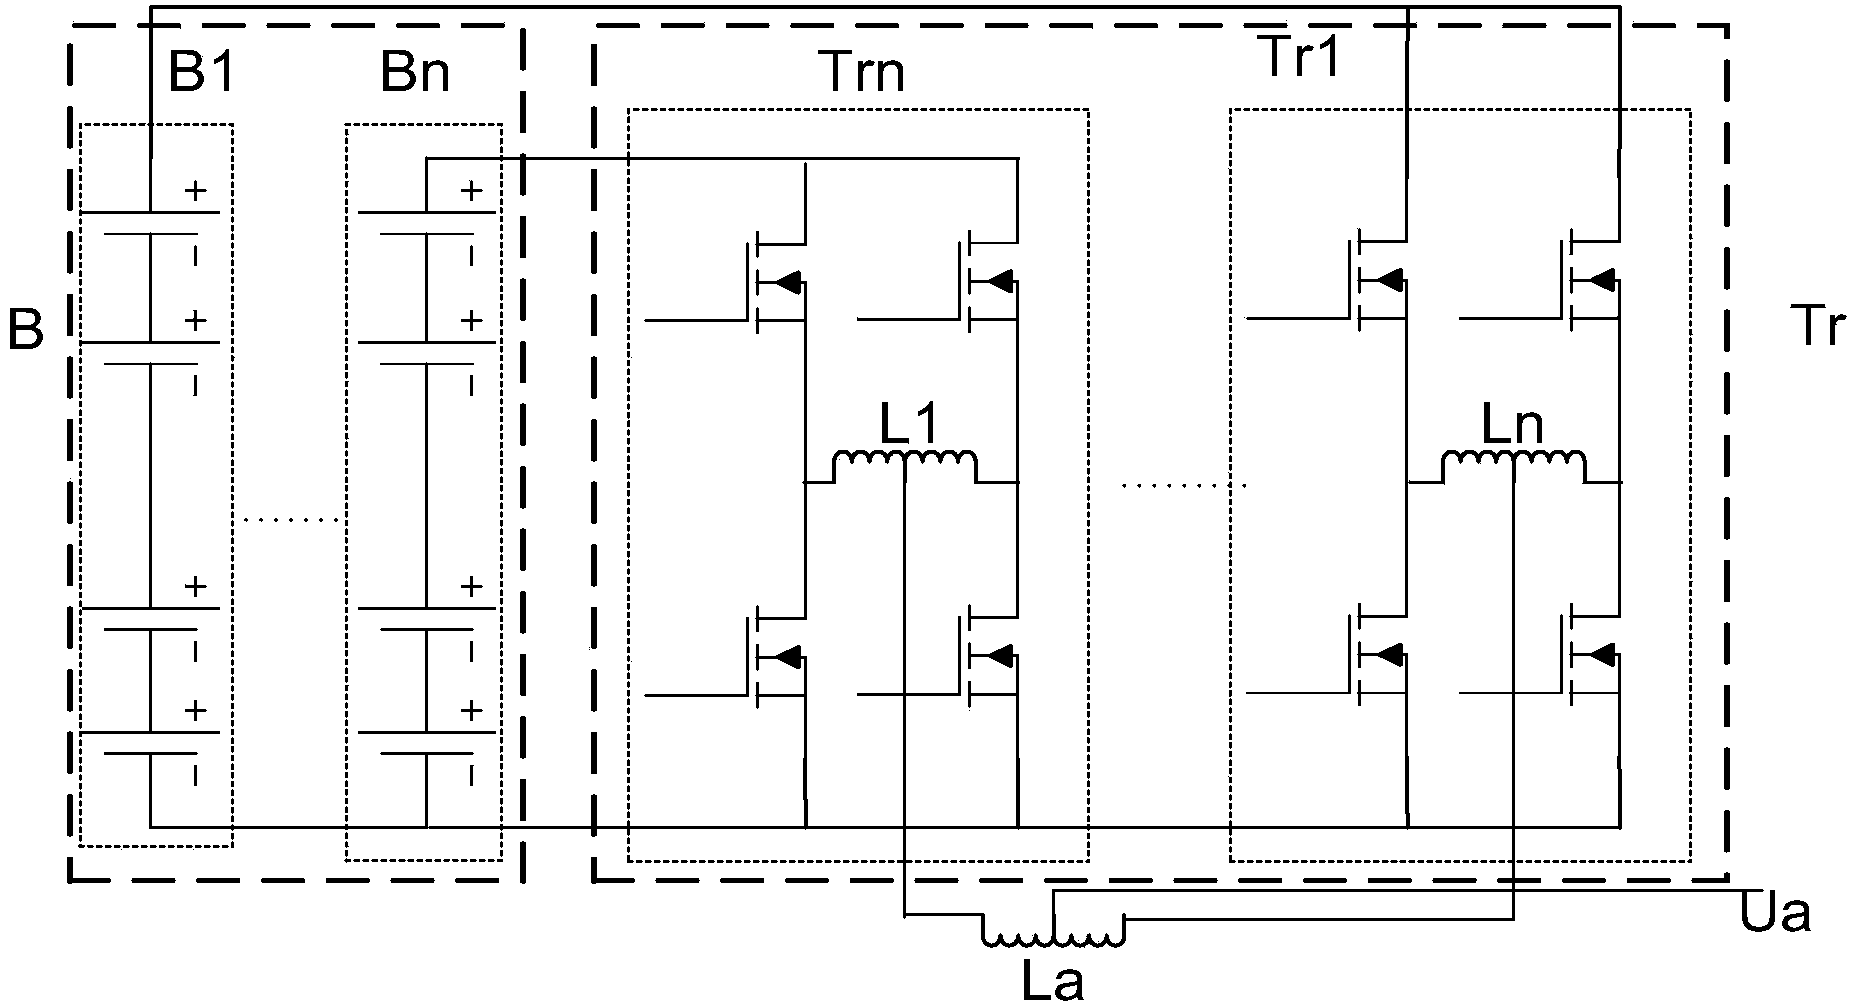 Electric car modularization power system based on parallel connection of batteries and control method